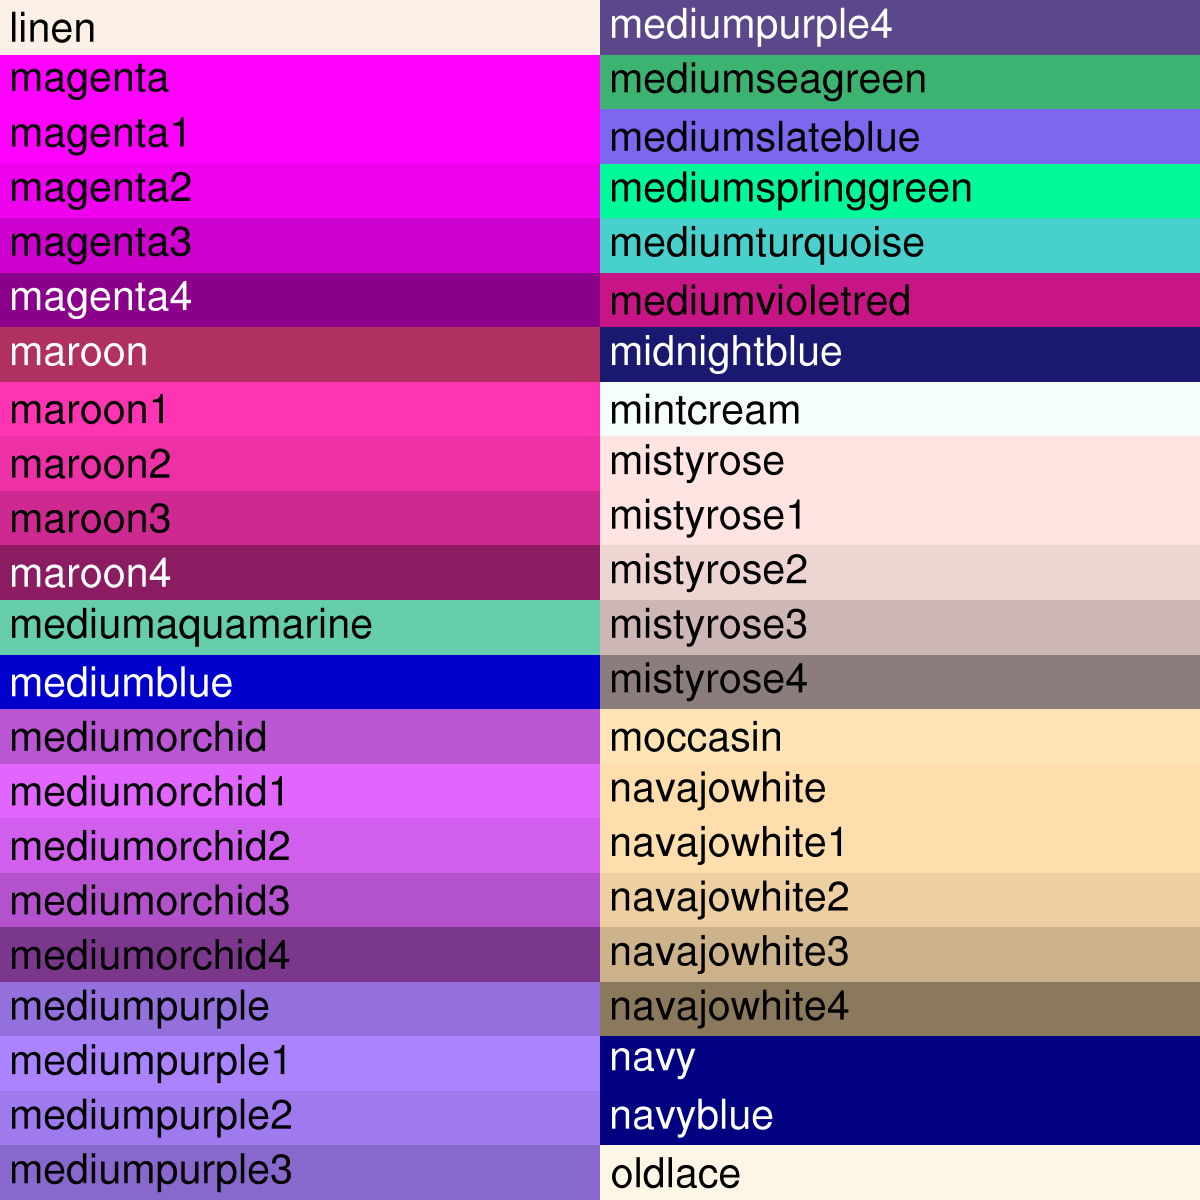 Named colors
